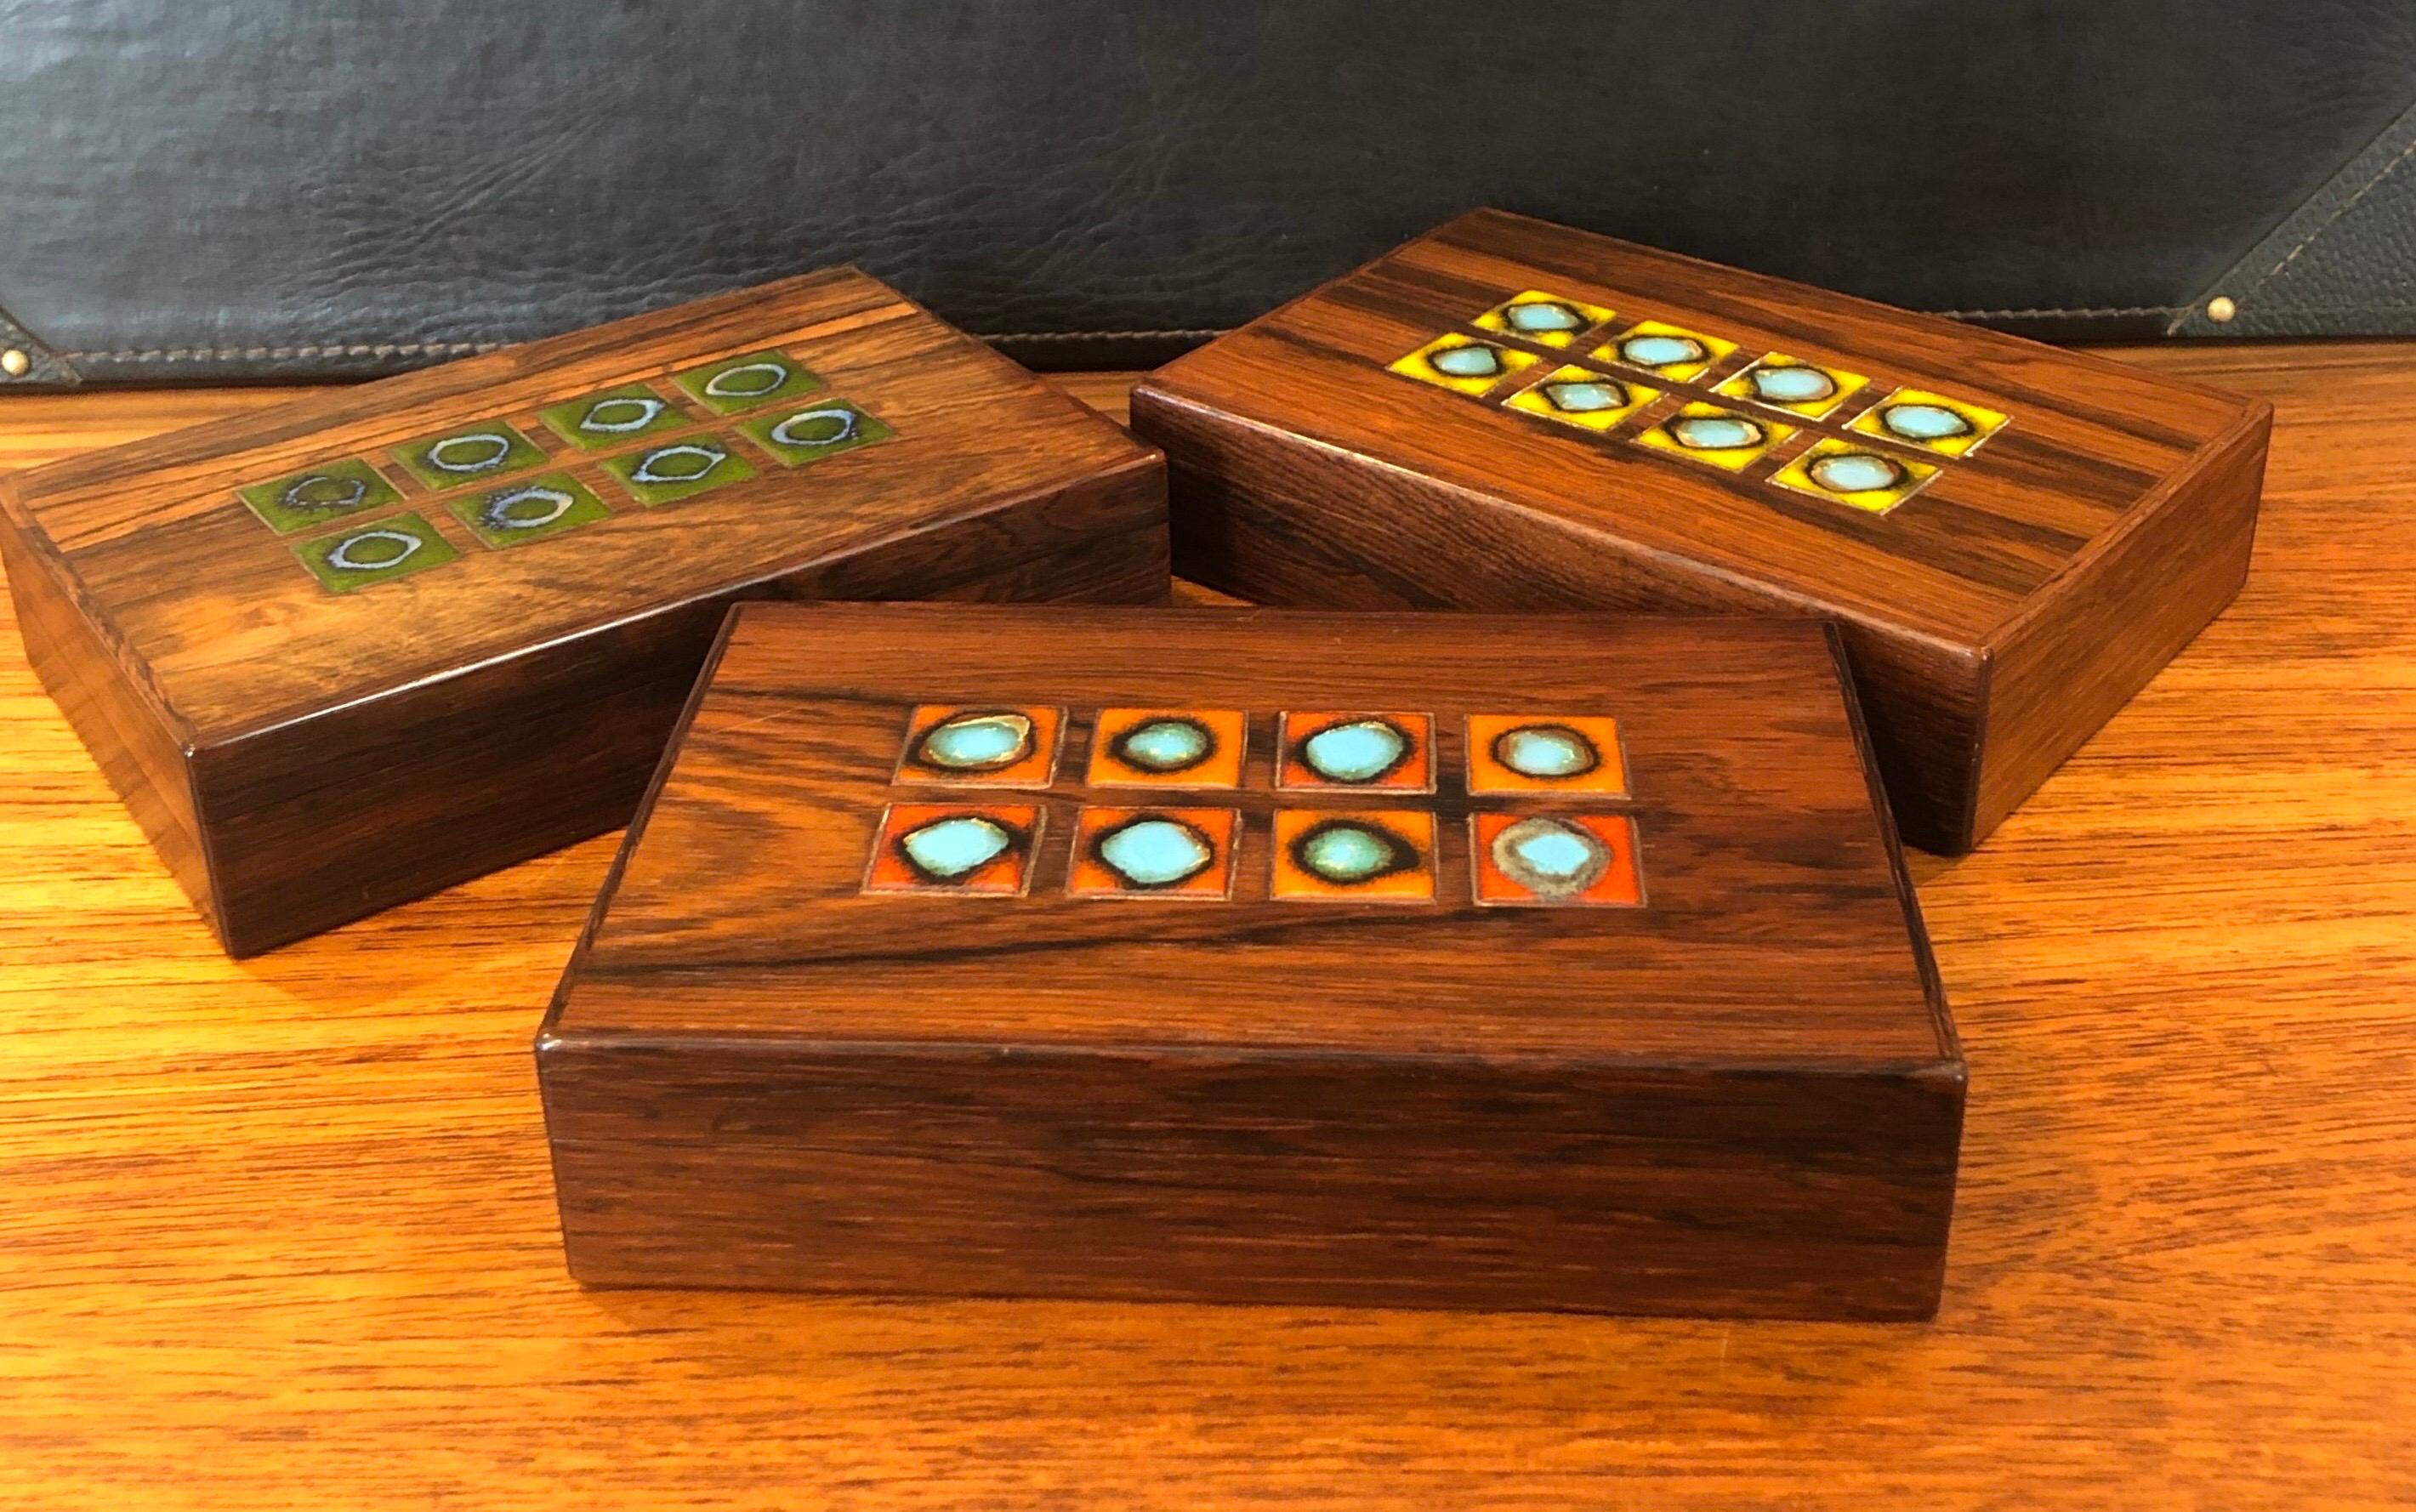 Three beautifully crafted solid wood trinket boxes / humidors by Danish craftsman Alfred Klitgaard, circa 1960s. Very detailed construction and exquisite finish with a eight gorgeous Bodil Eje (orange, yellow or green) ceramic tiles inset in the